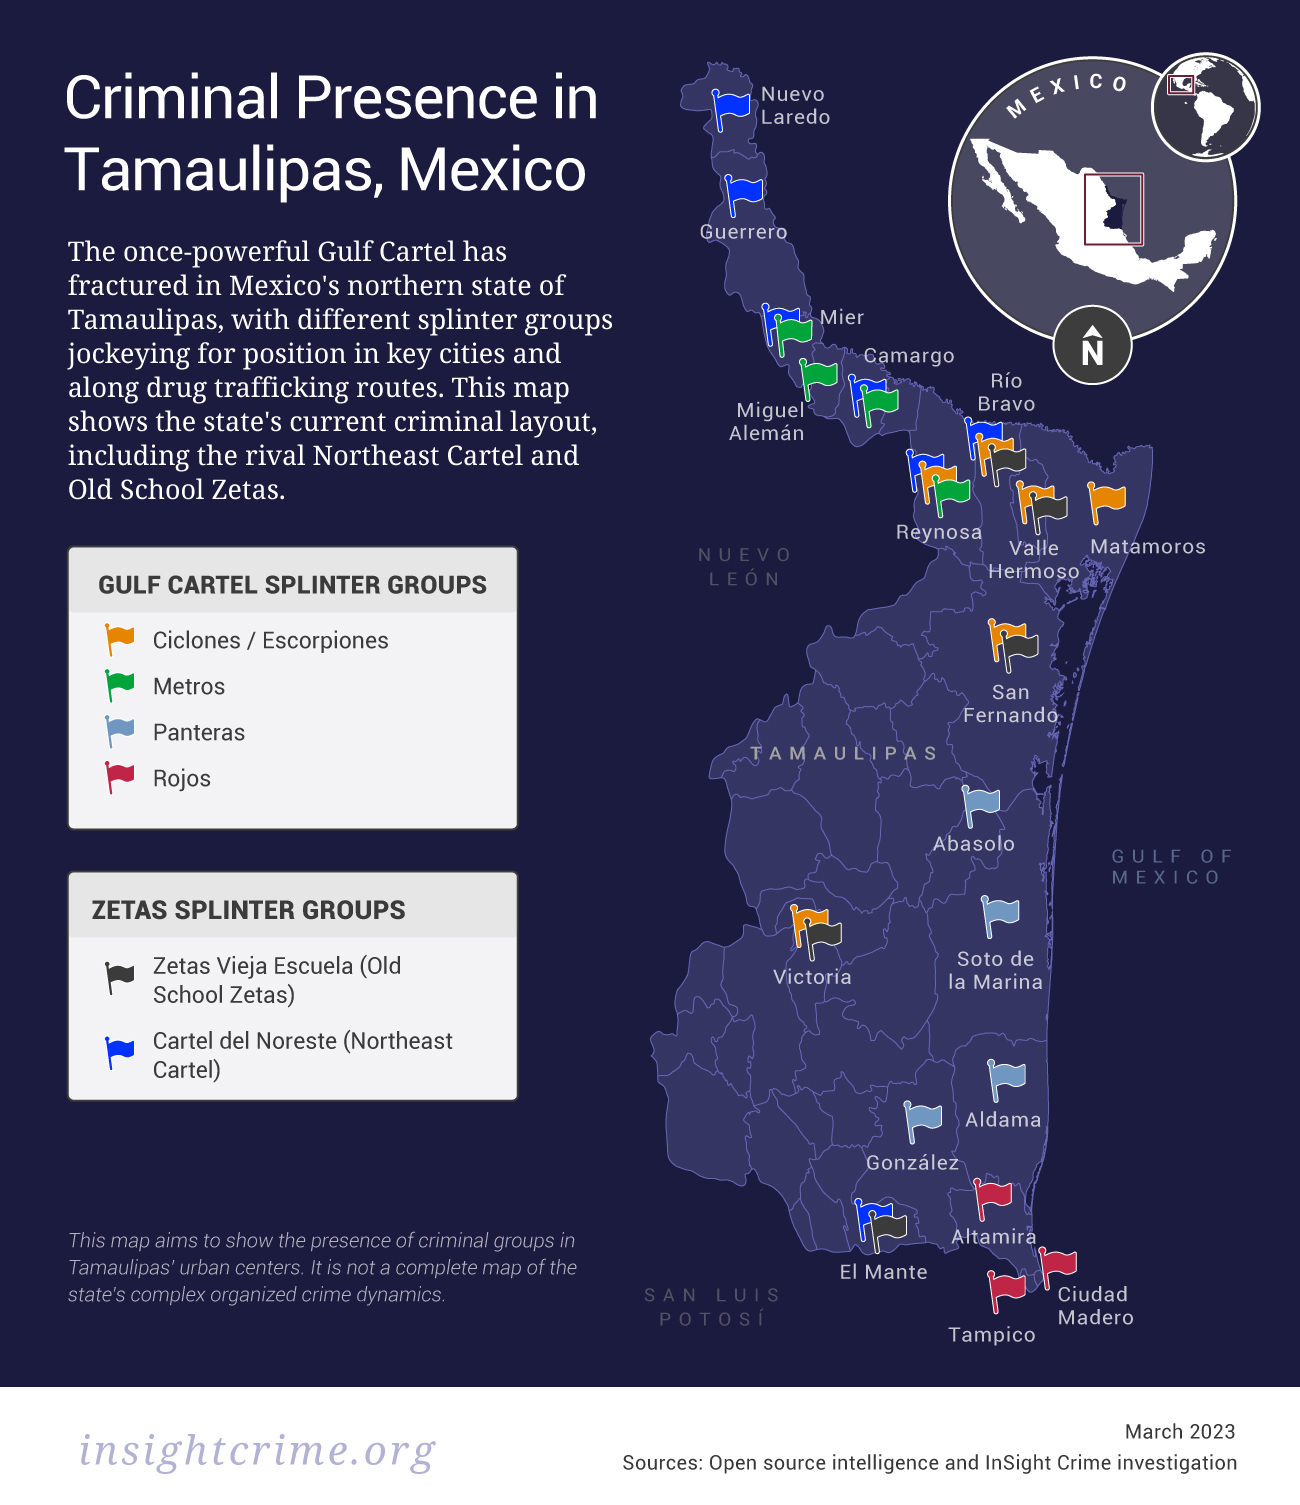 This map of Tamaulipas, Mexico, shows the presence of key criminal groups, including the Gulf Cartel and Northeast Cartel.